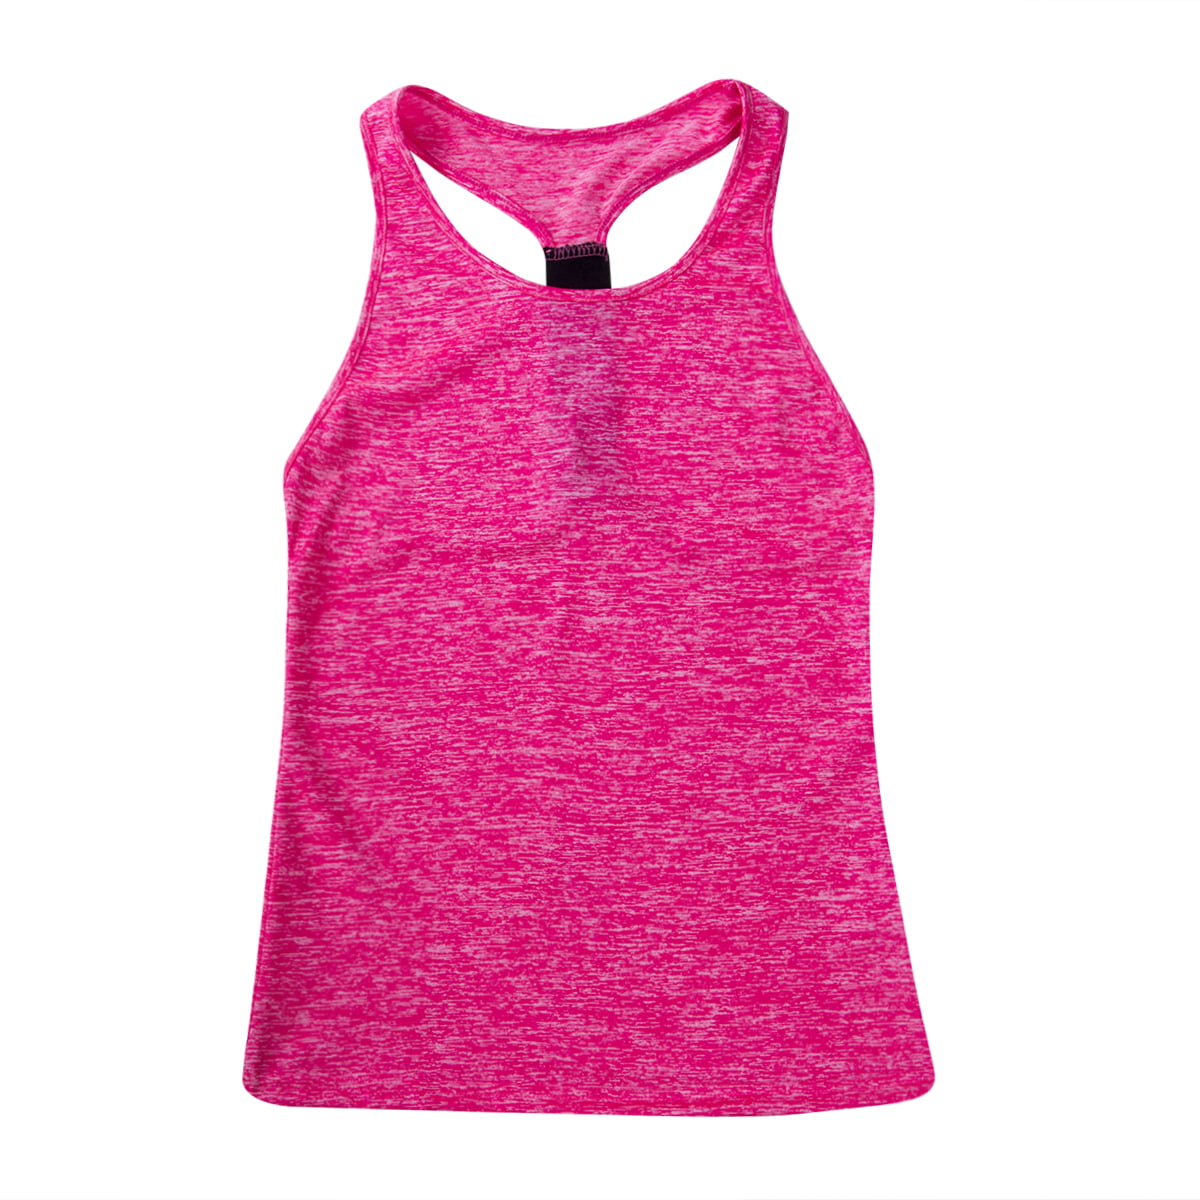 Womens Ladies Sports Vest Tank Top Stretch Cool Dry Wicking Fitness Gym Yoga Run 